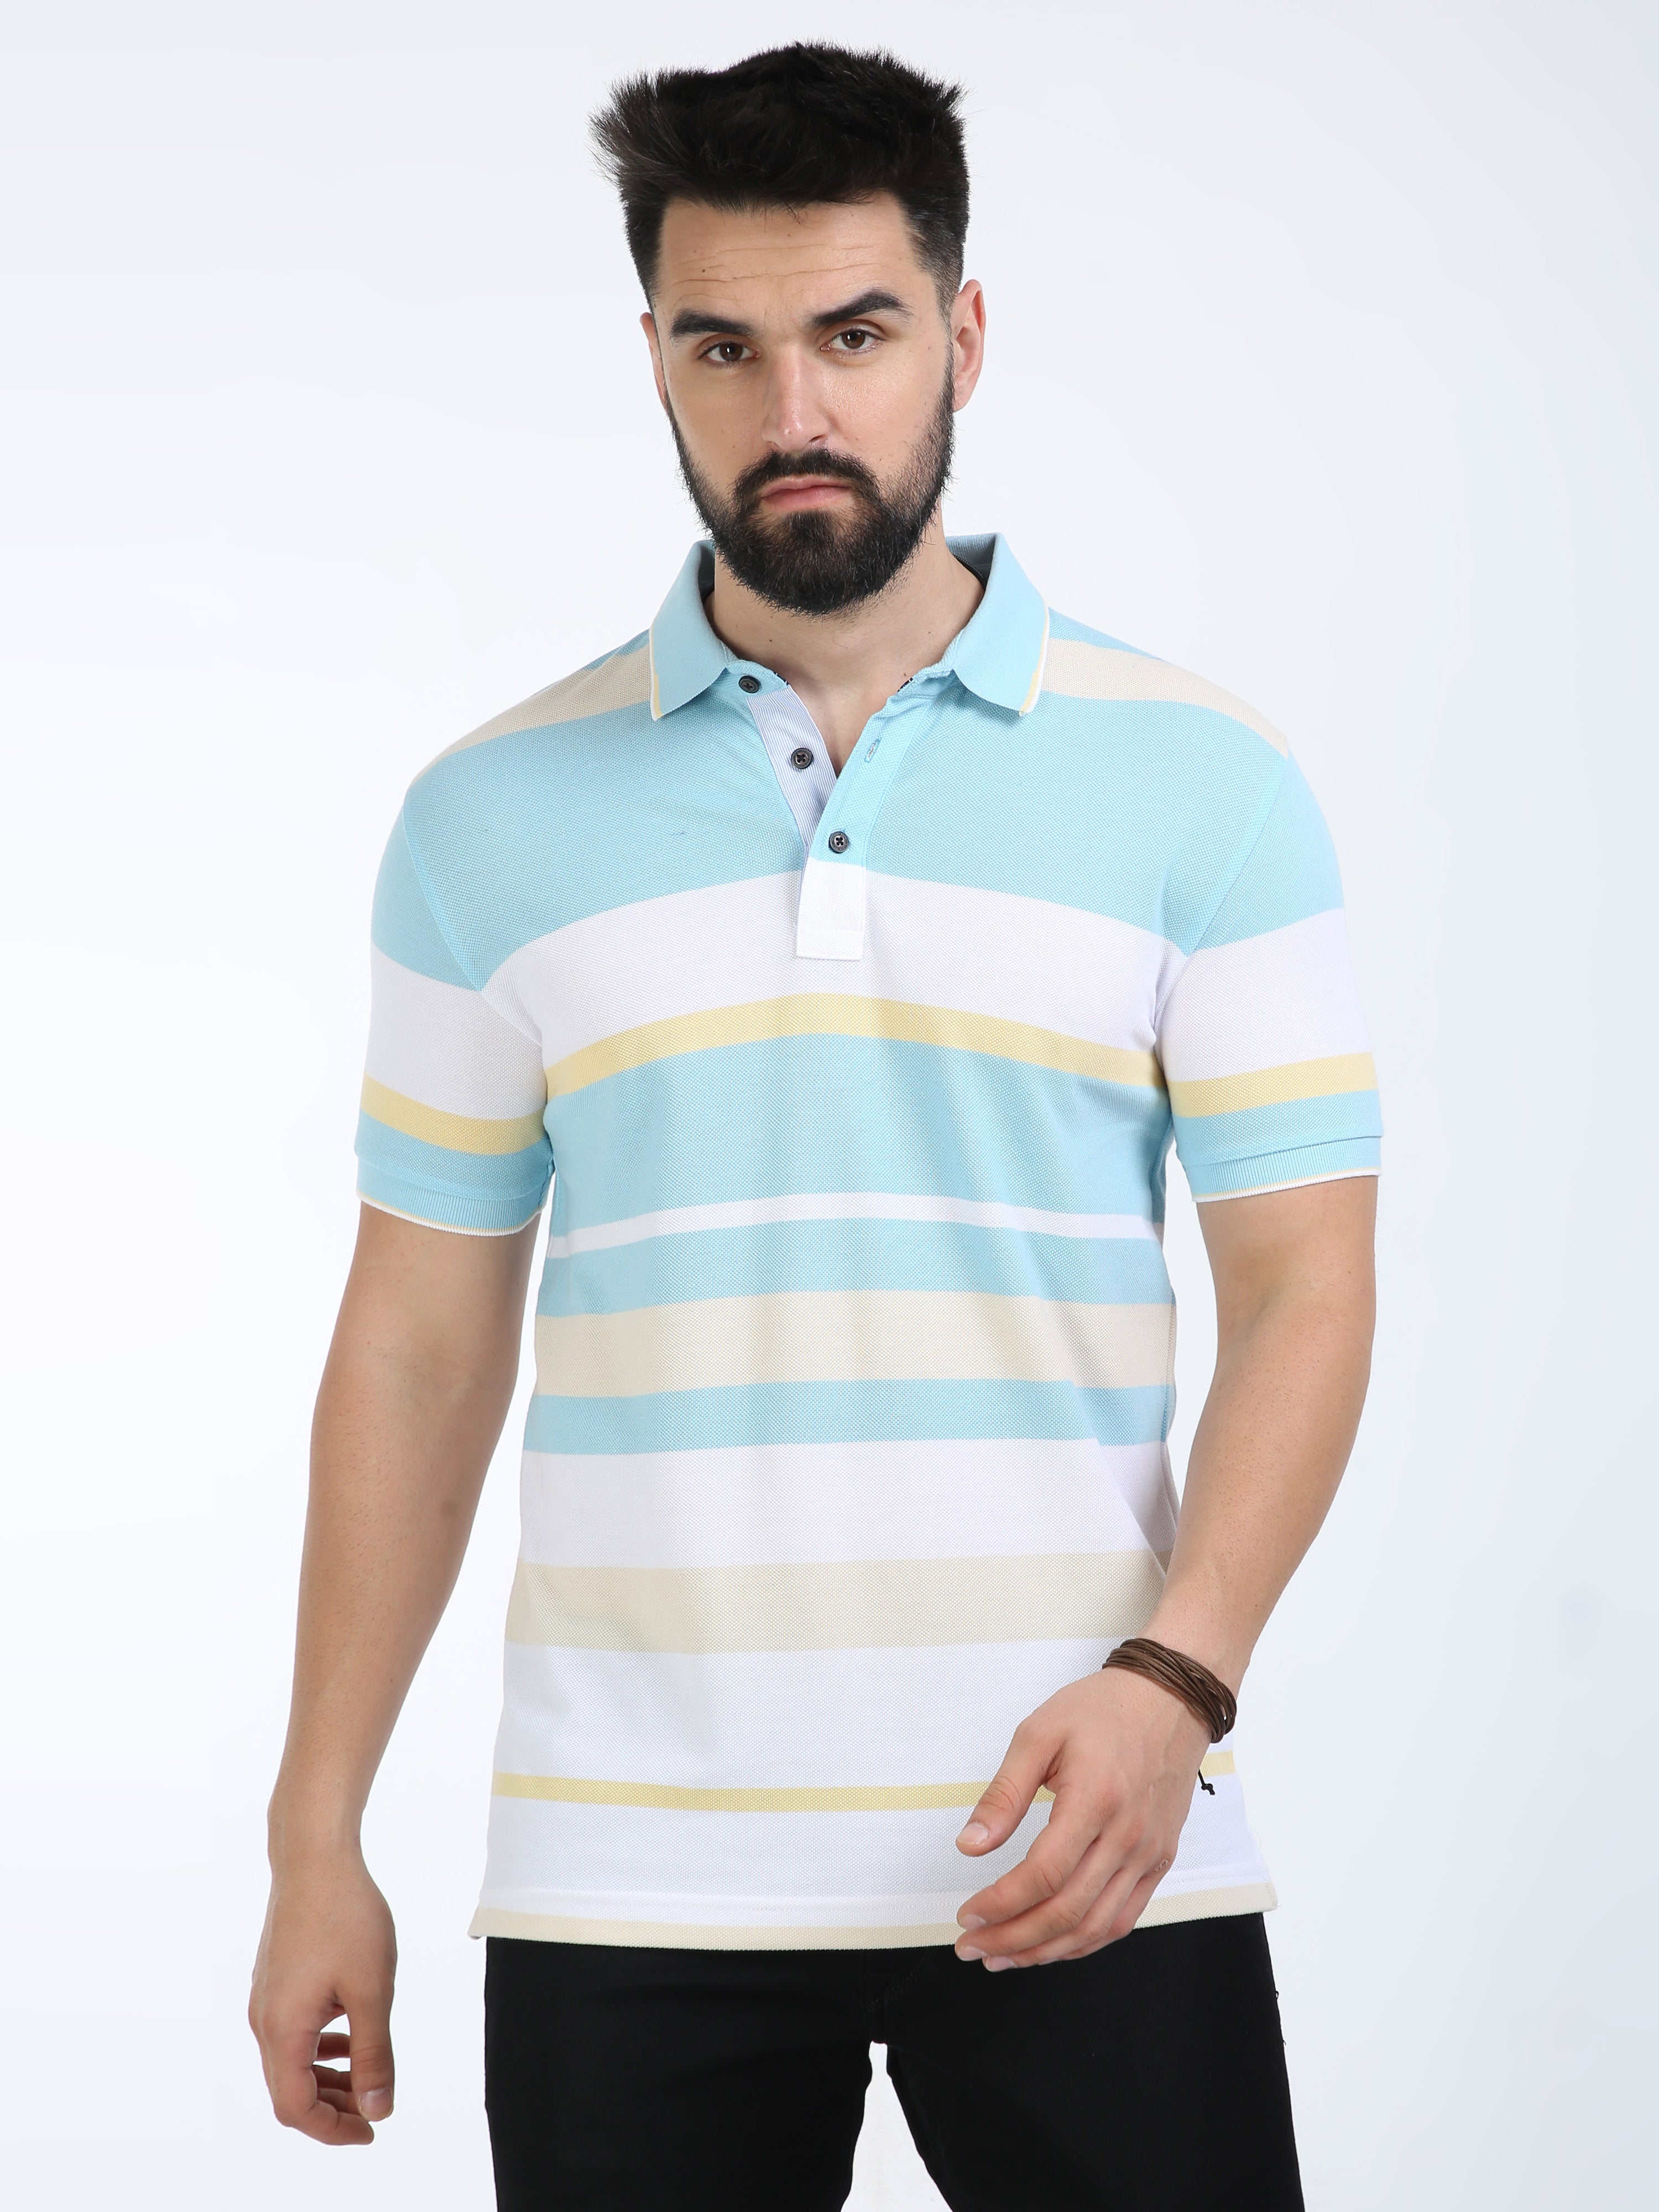 Classic Polo Mens Cotton Half Sleeves Striped Slim Fit Polo Neck White Color T-Shirt | Vta - 242 A Sf P